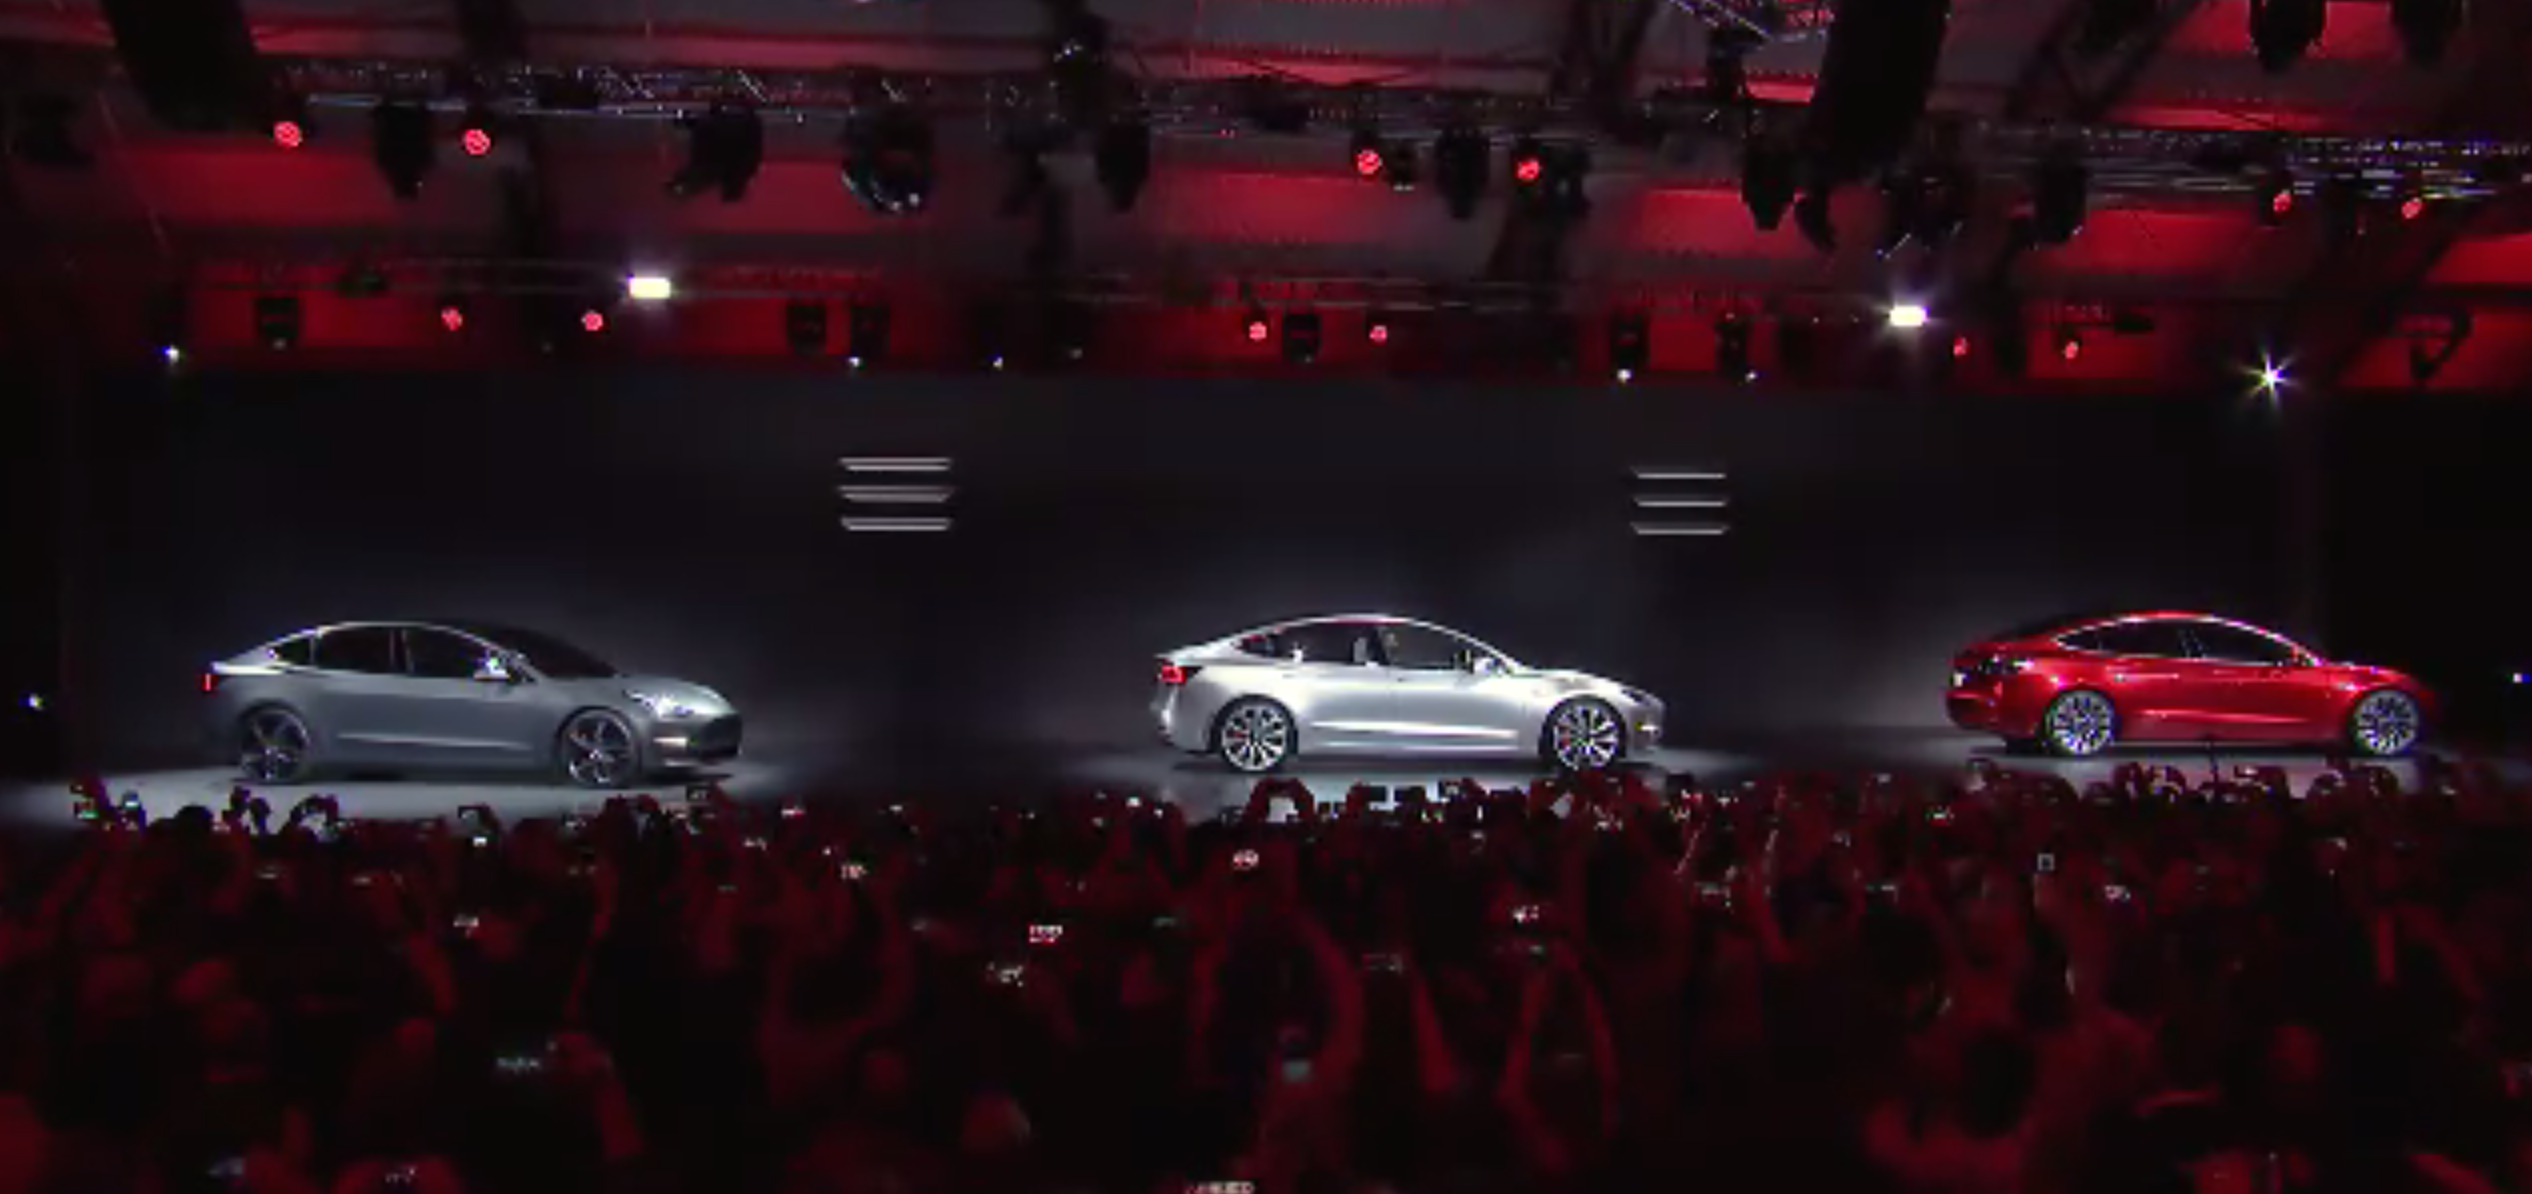 Tesla Says It Has Received More Than 325,000 Preorders For The Model 3 In First Week